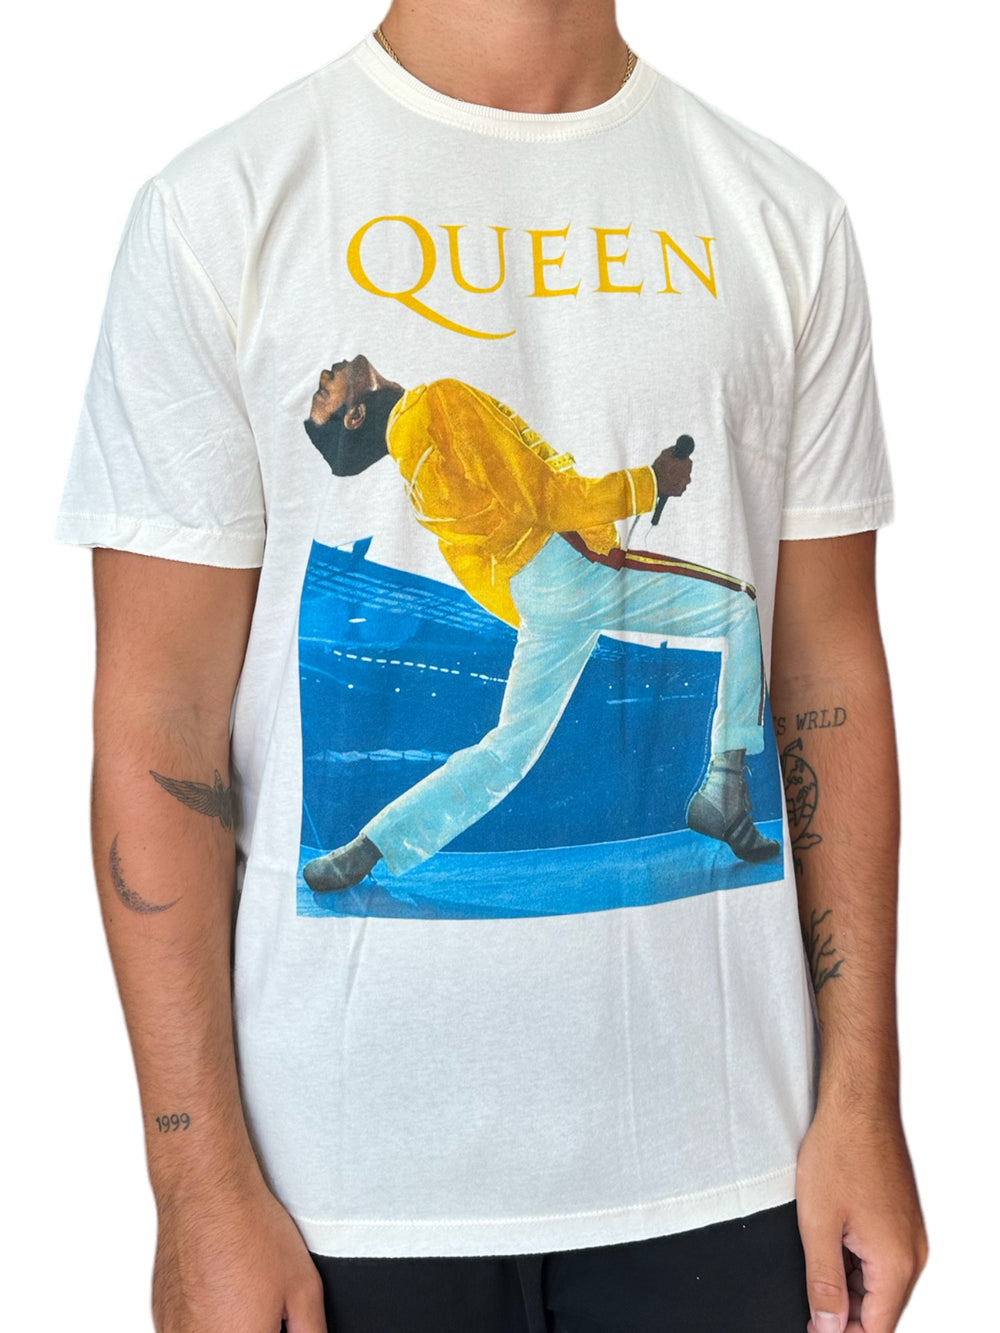 Queen Freddie Triangle Amplified Vintage White T Shirt Various Sizes